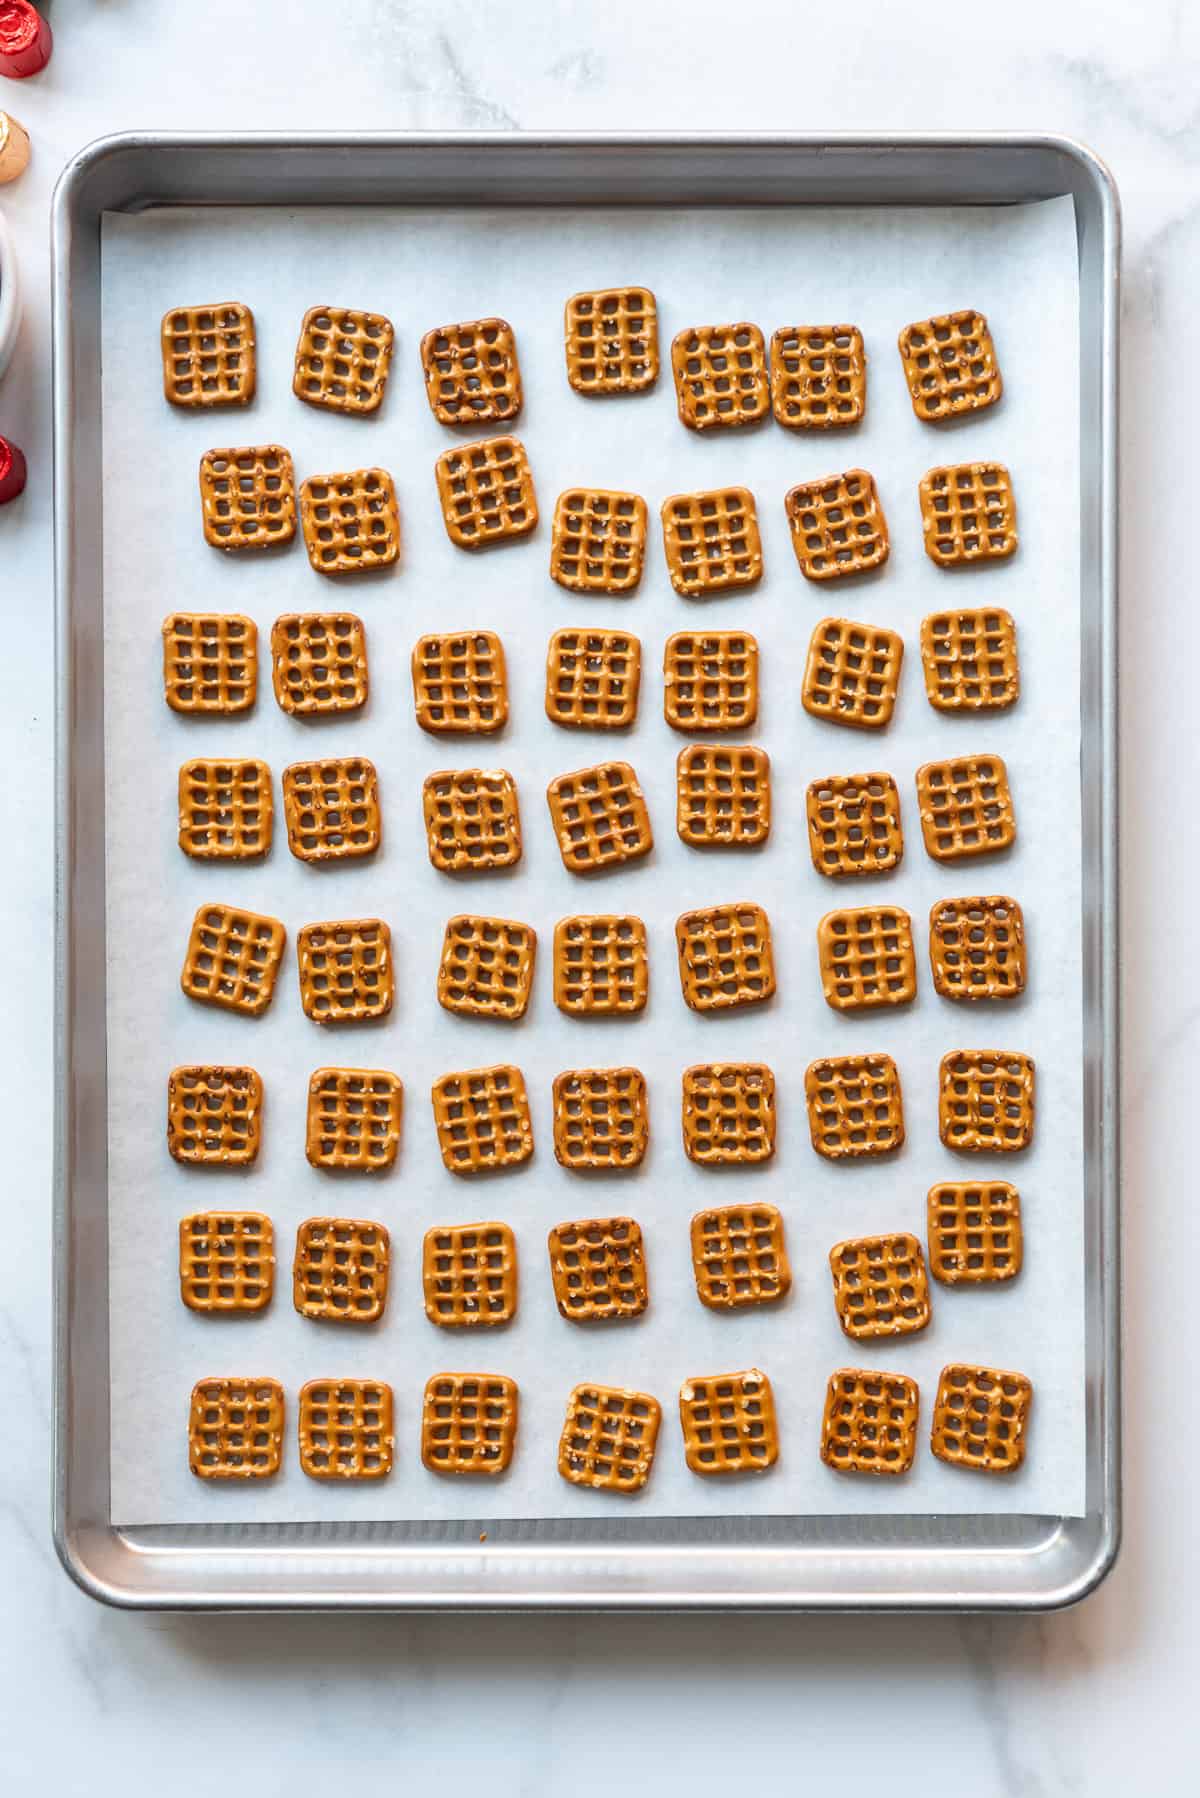 Square pretzels arranged on a baking sheet lined with parchment paper.